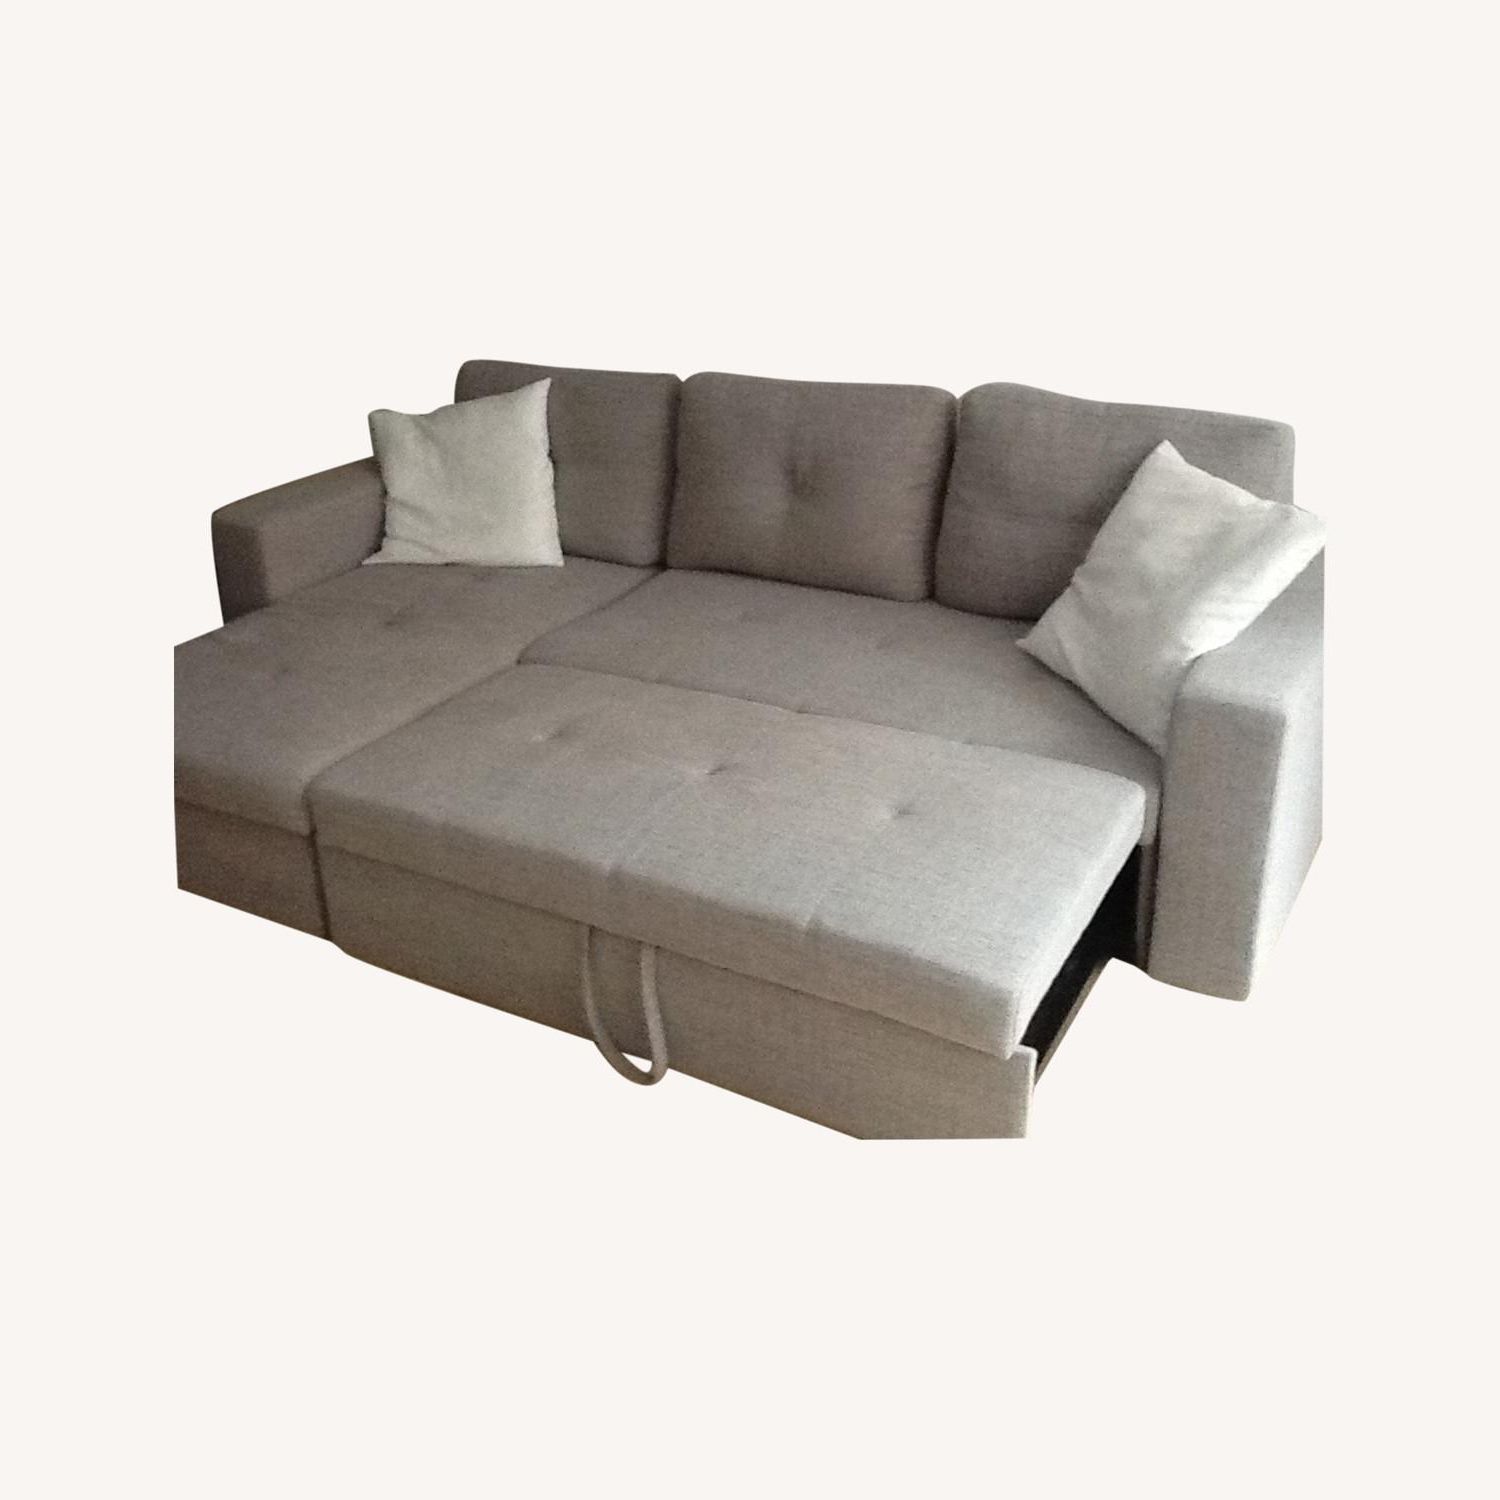 Most Recent Grey Pull Out Sleeper Sofa – Aptdeco Pertaining To 3 In 1 Gray Pull Out Sleeper Sofas (View 8 of 15)